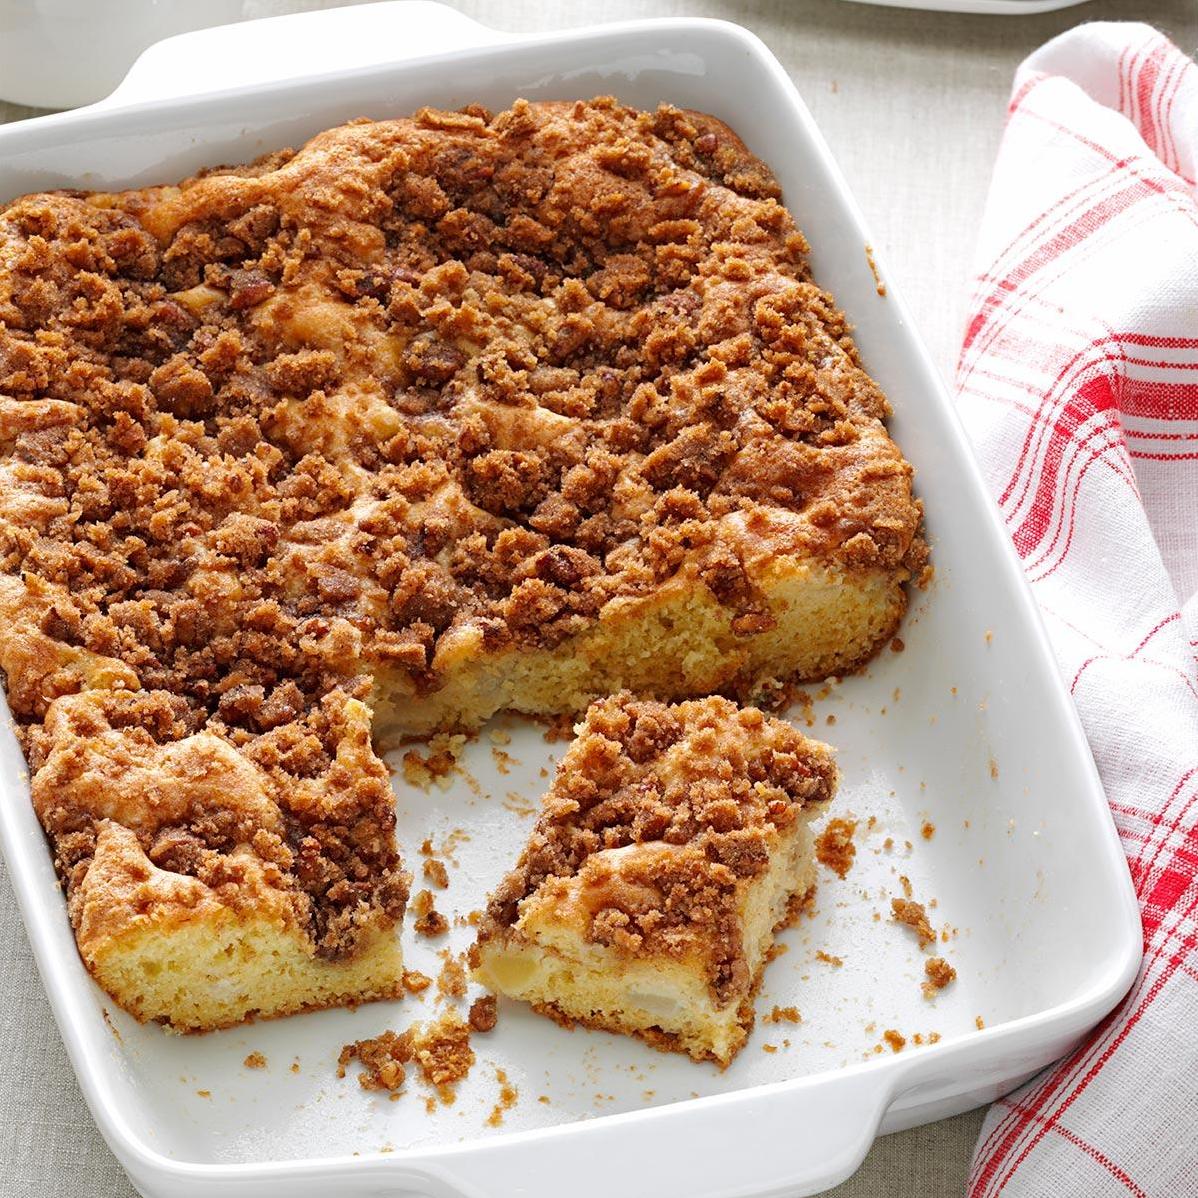  Start your day with a slice of this comforting pear coffee cake.